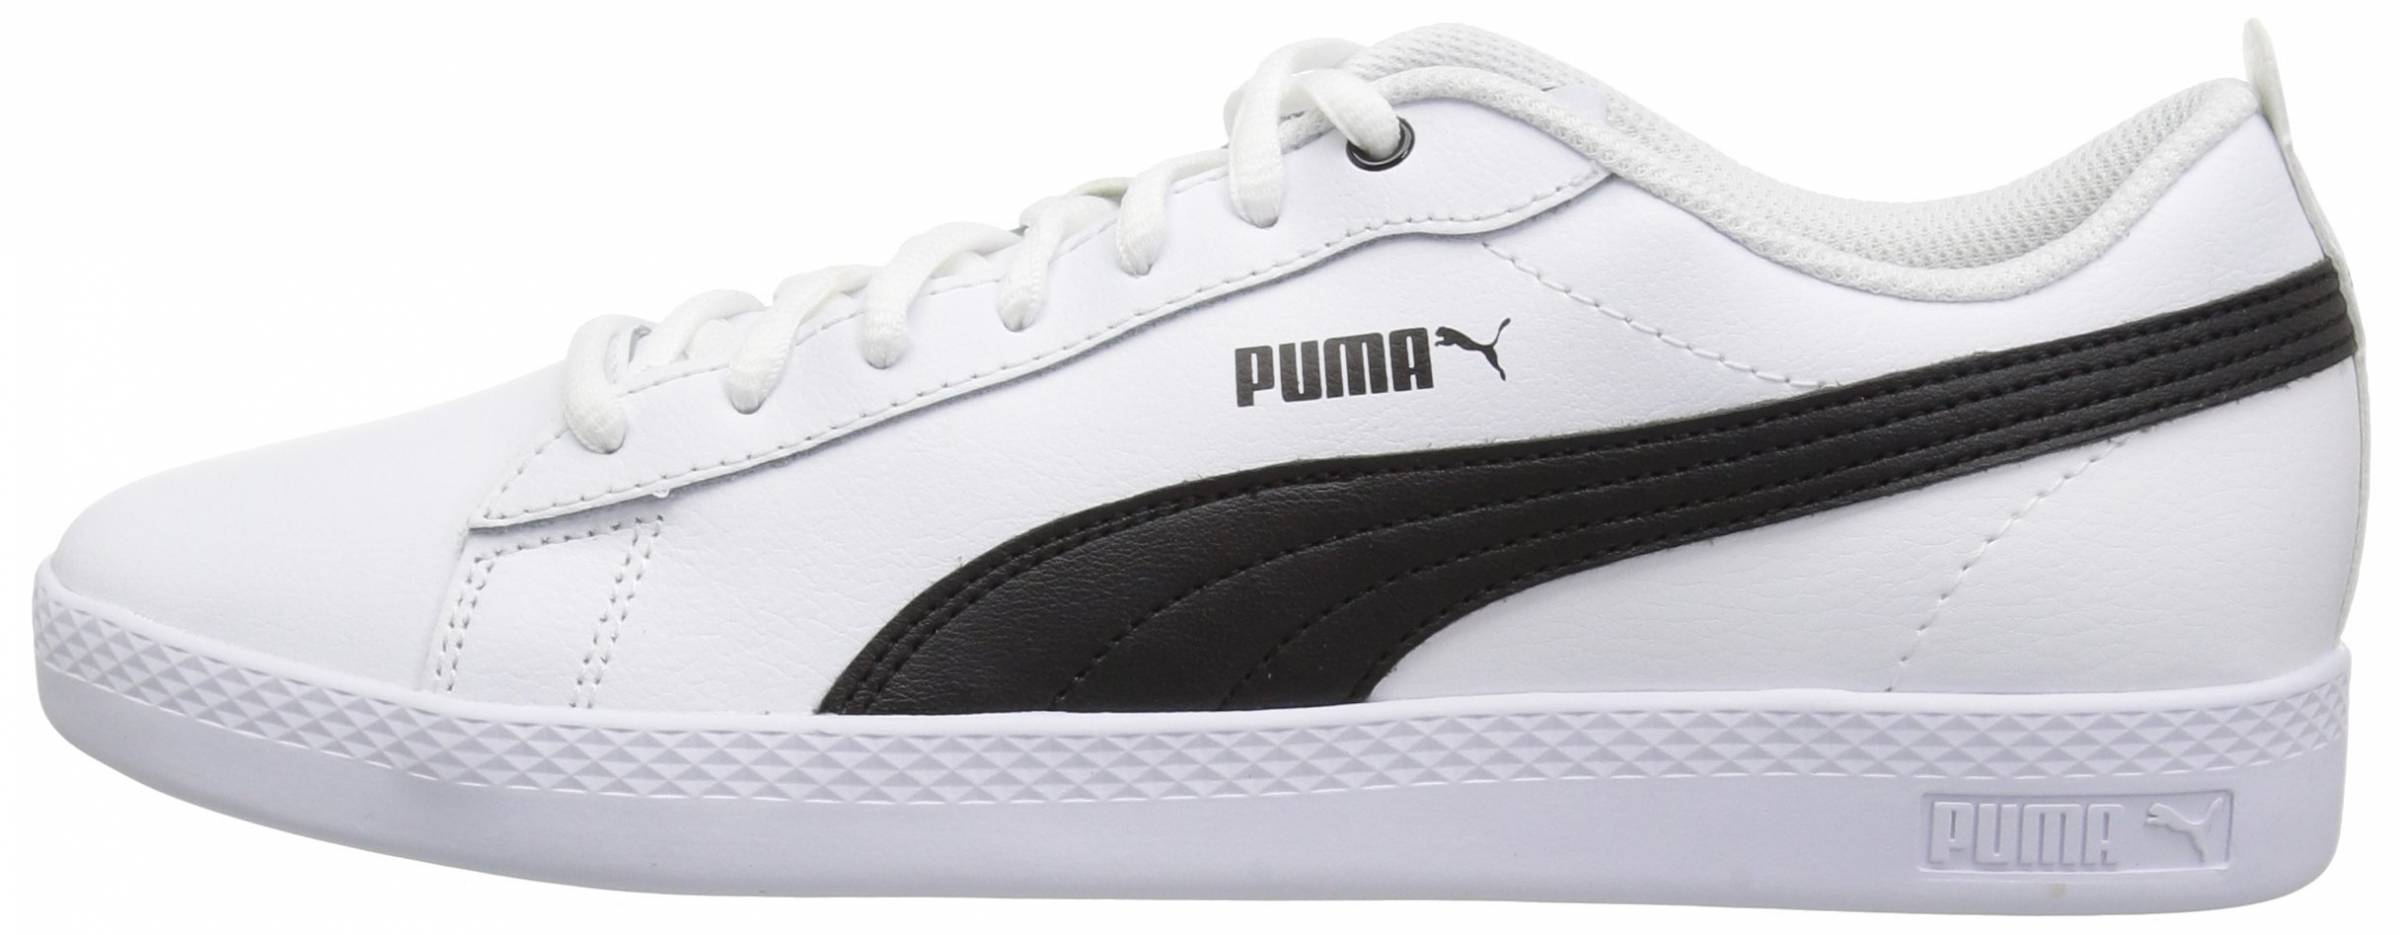 puma white sneakers online